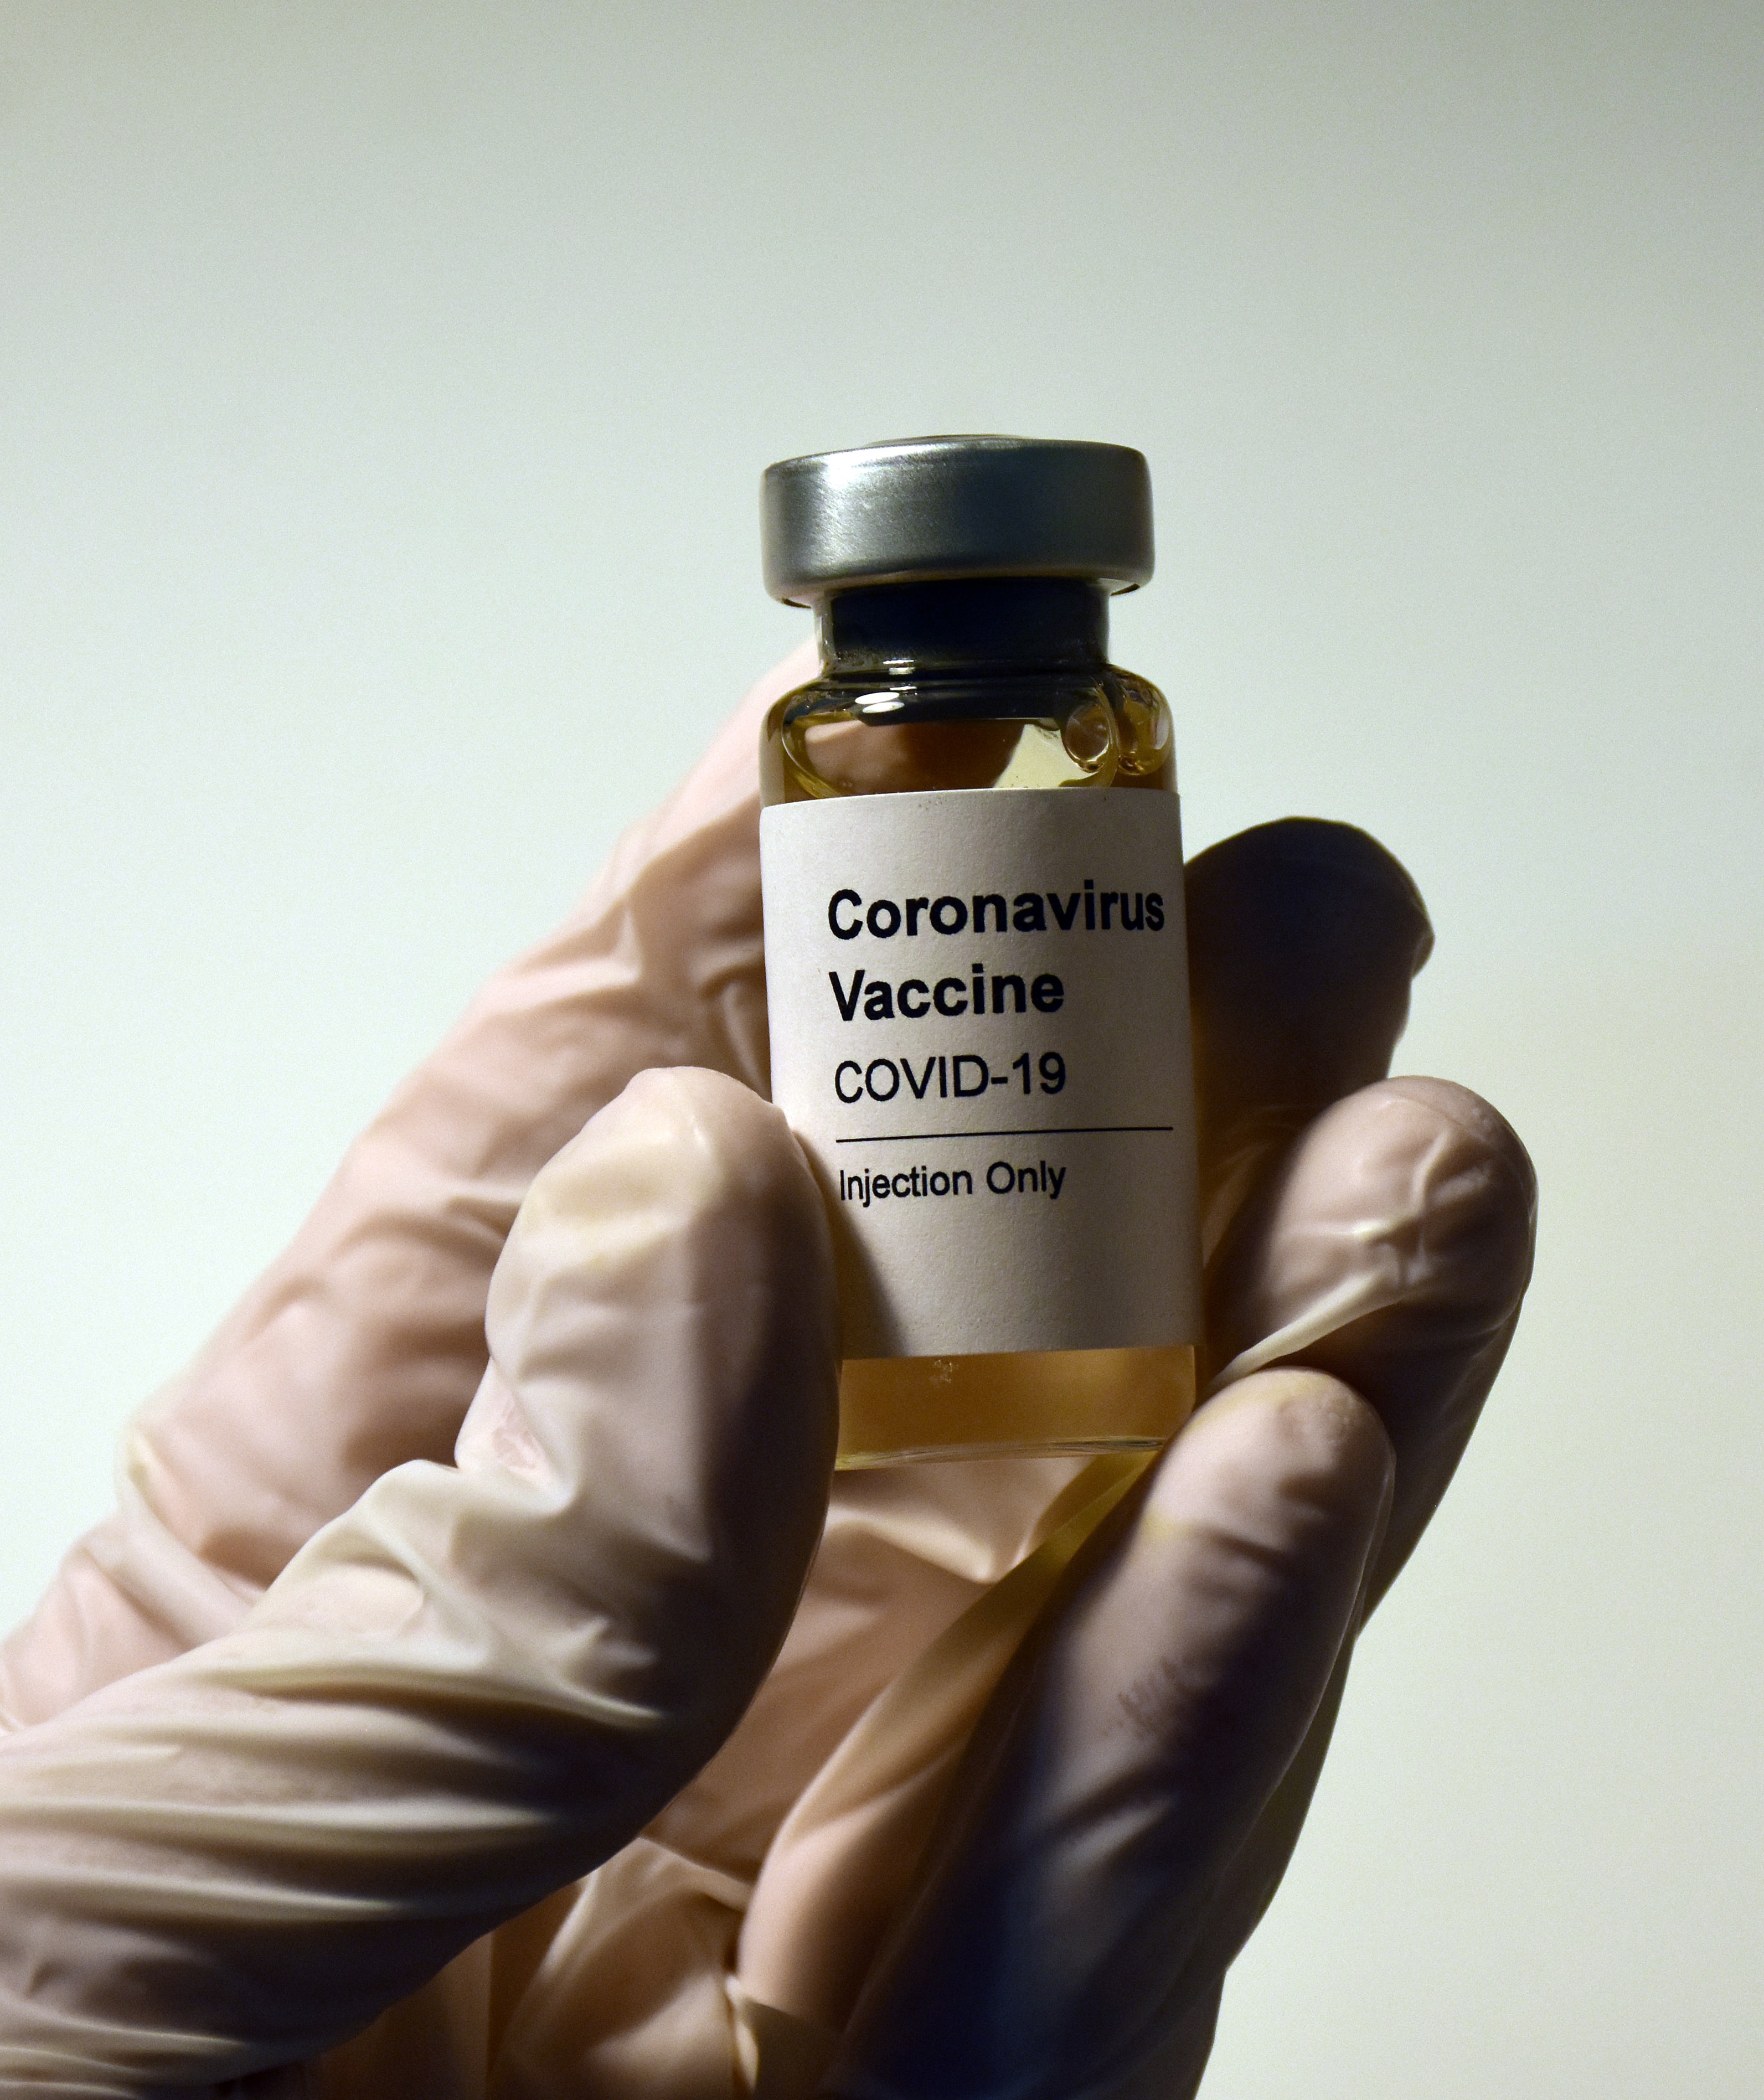 Concern Grows Over FEMA Vaccination Site In Philadelphia Due to Alleged Racial Gaps